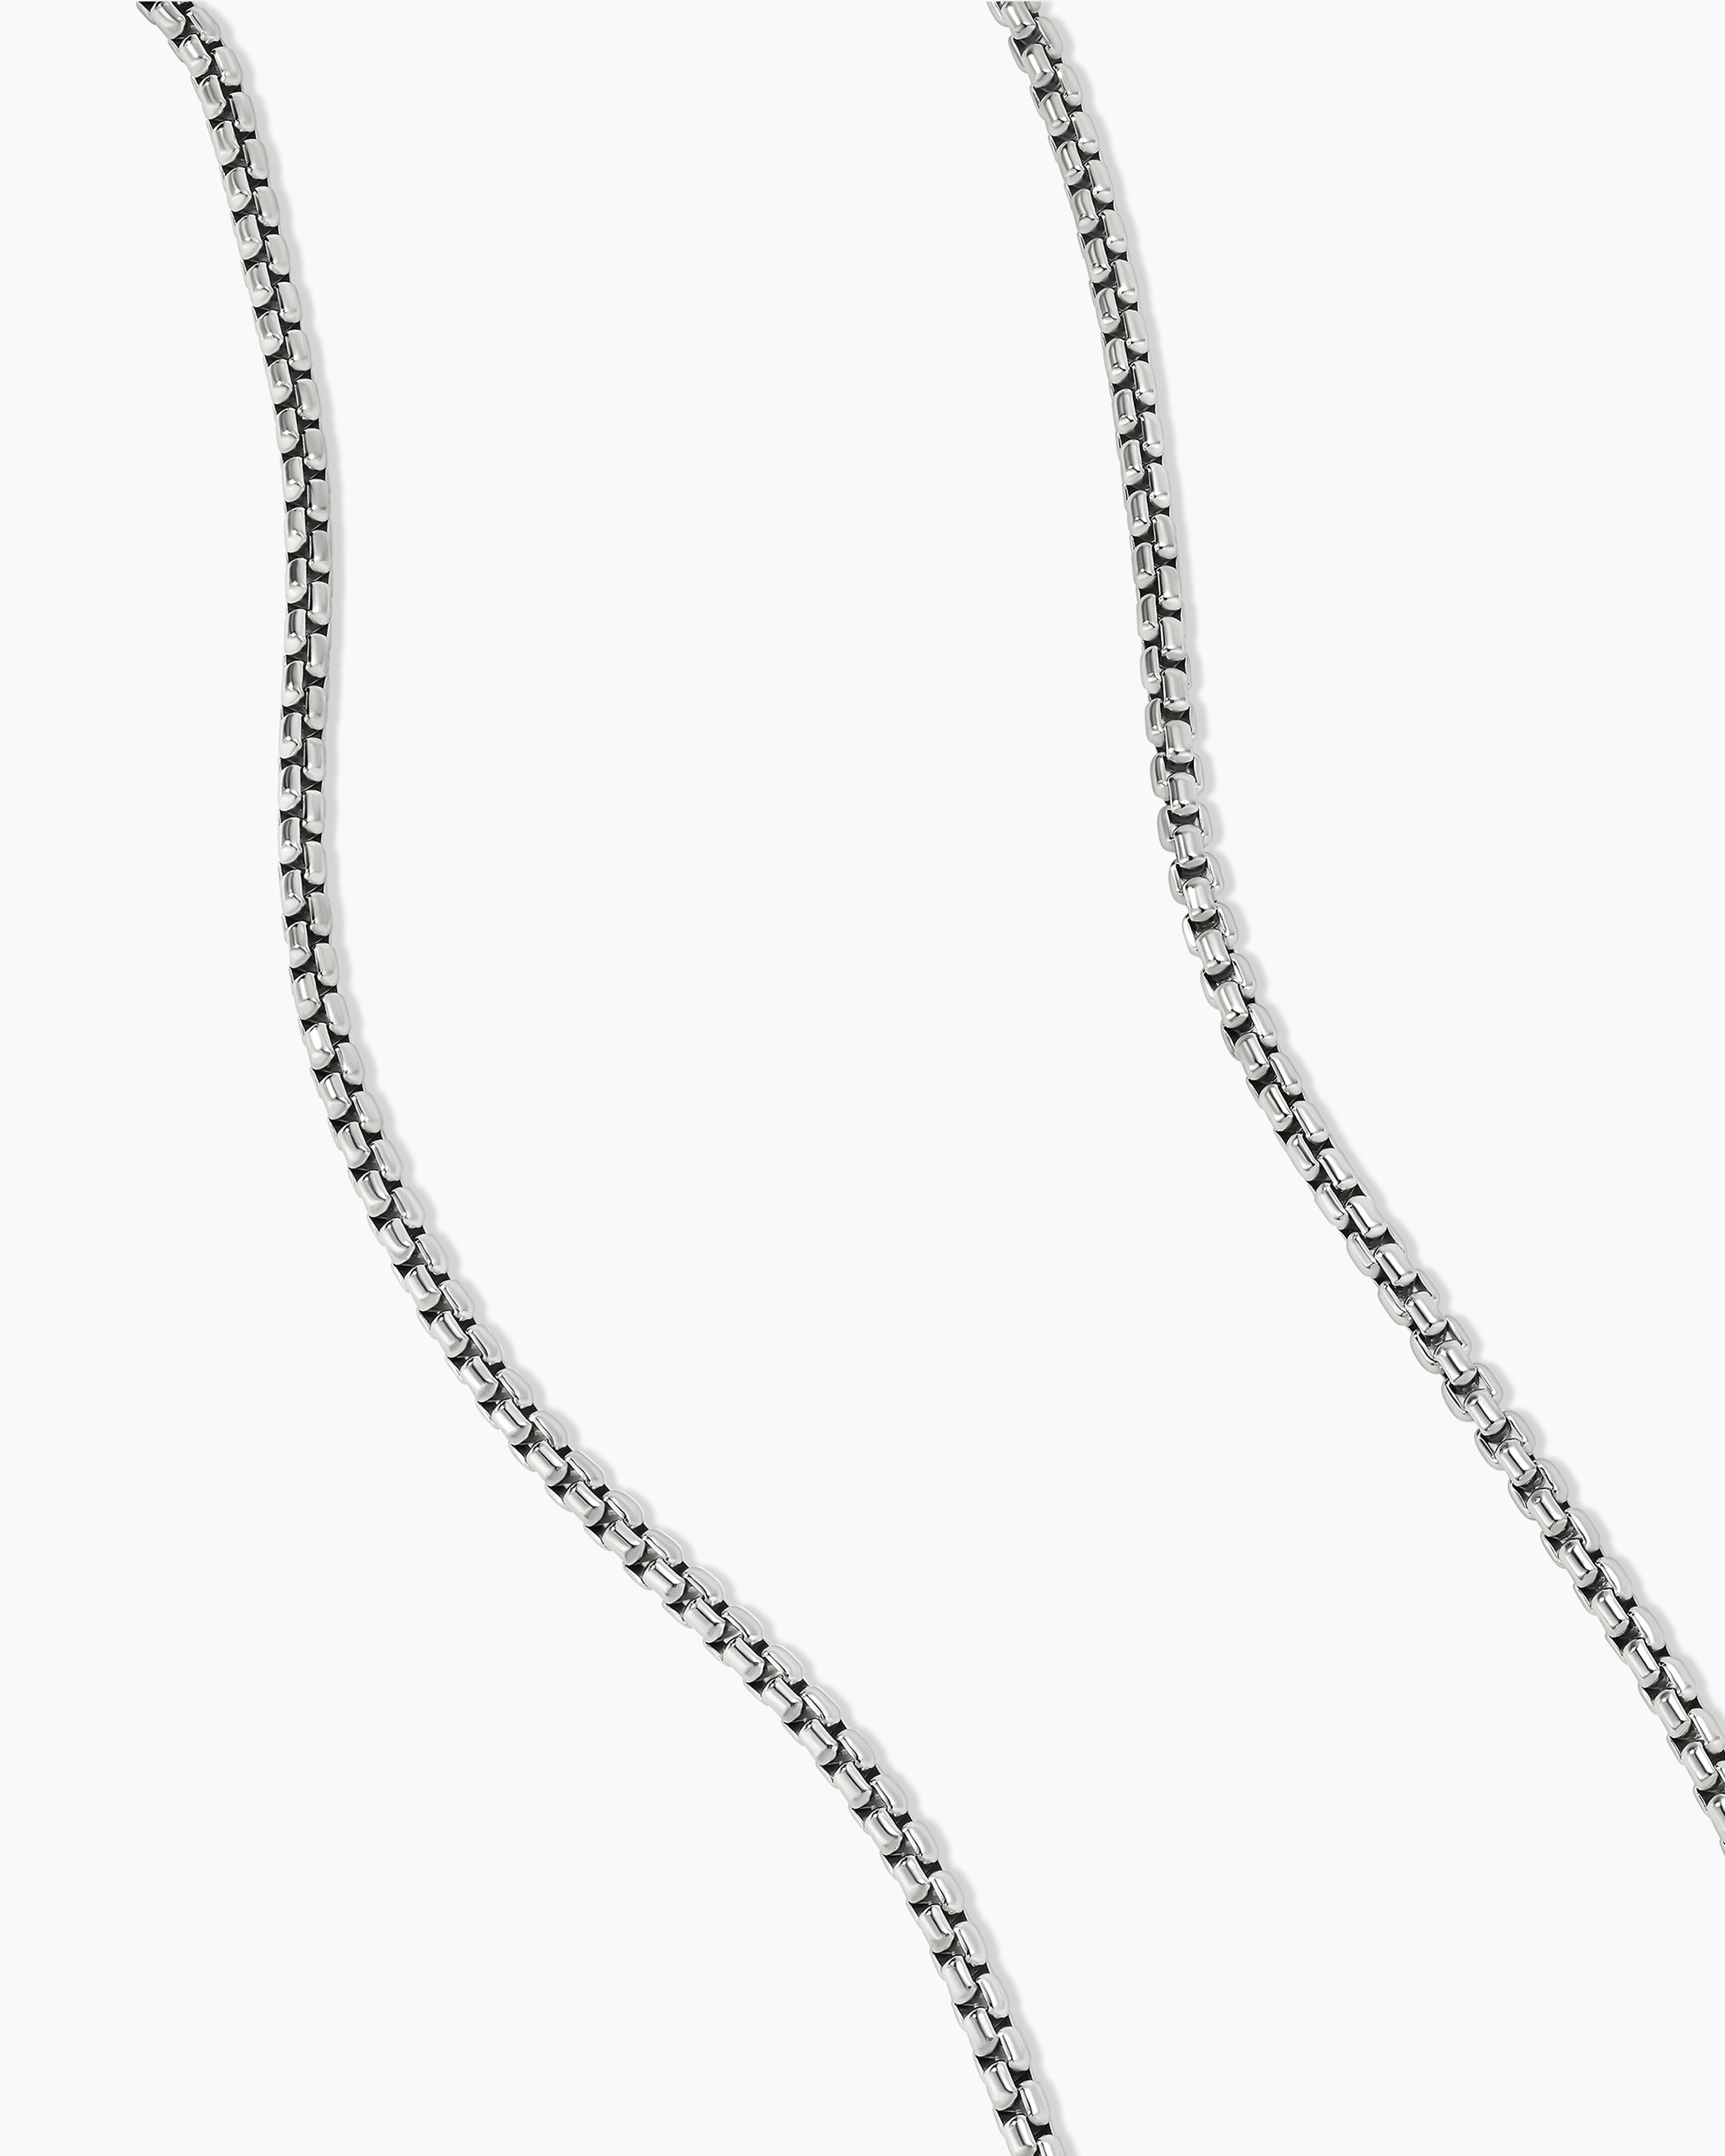 Solid White Gold Rope Chain 10k - 14k | The Gold Gods